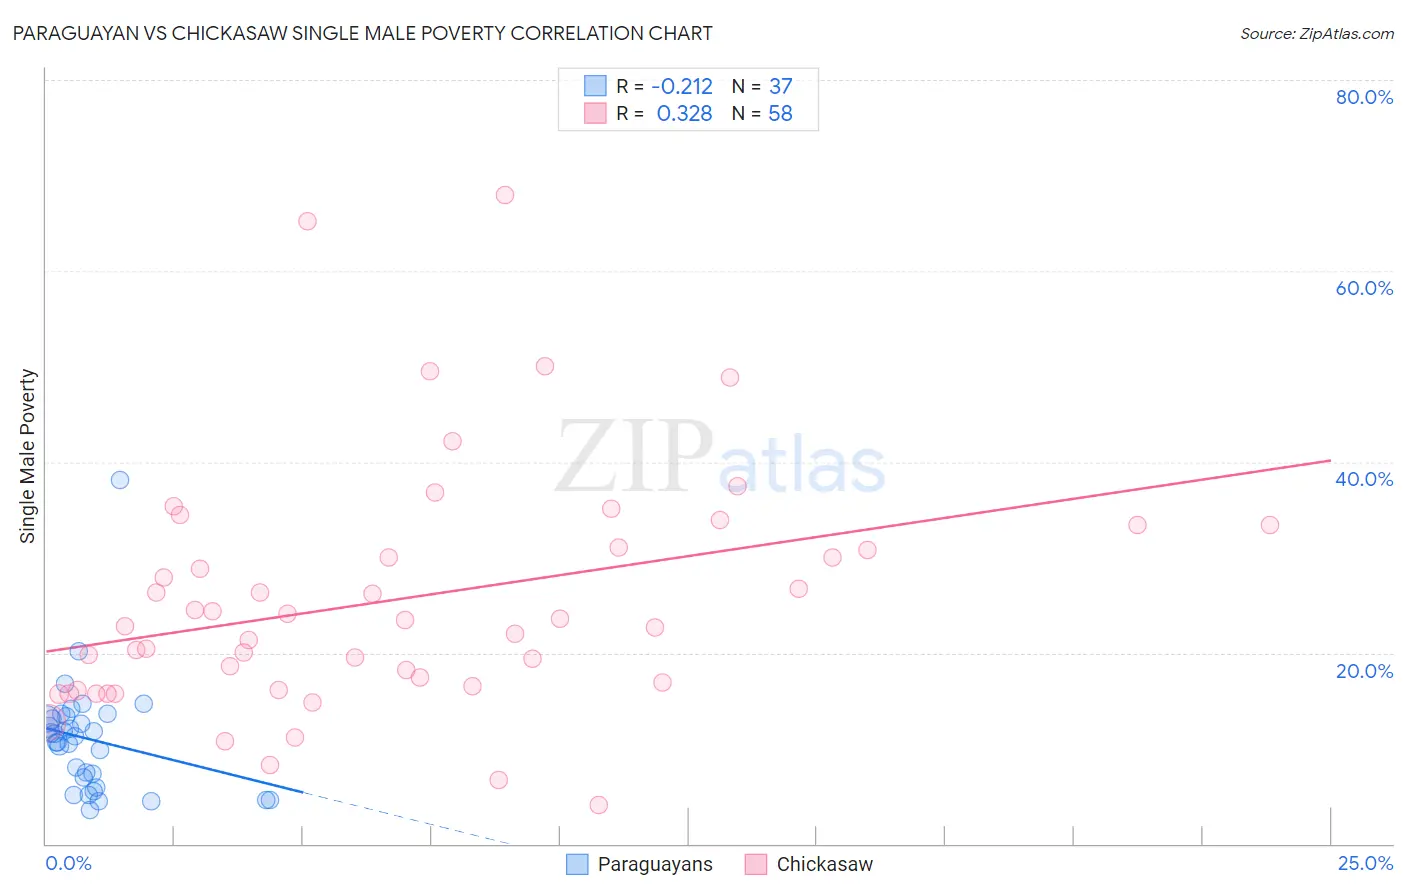 Paraguayan vs Chickasaw Single Male Poverty